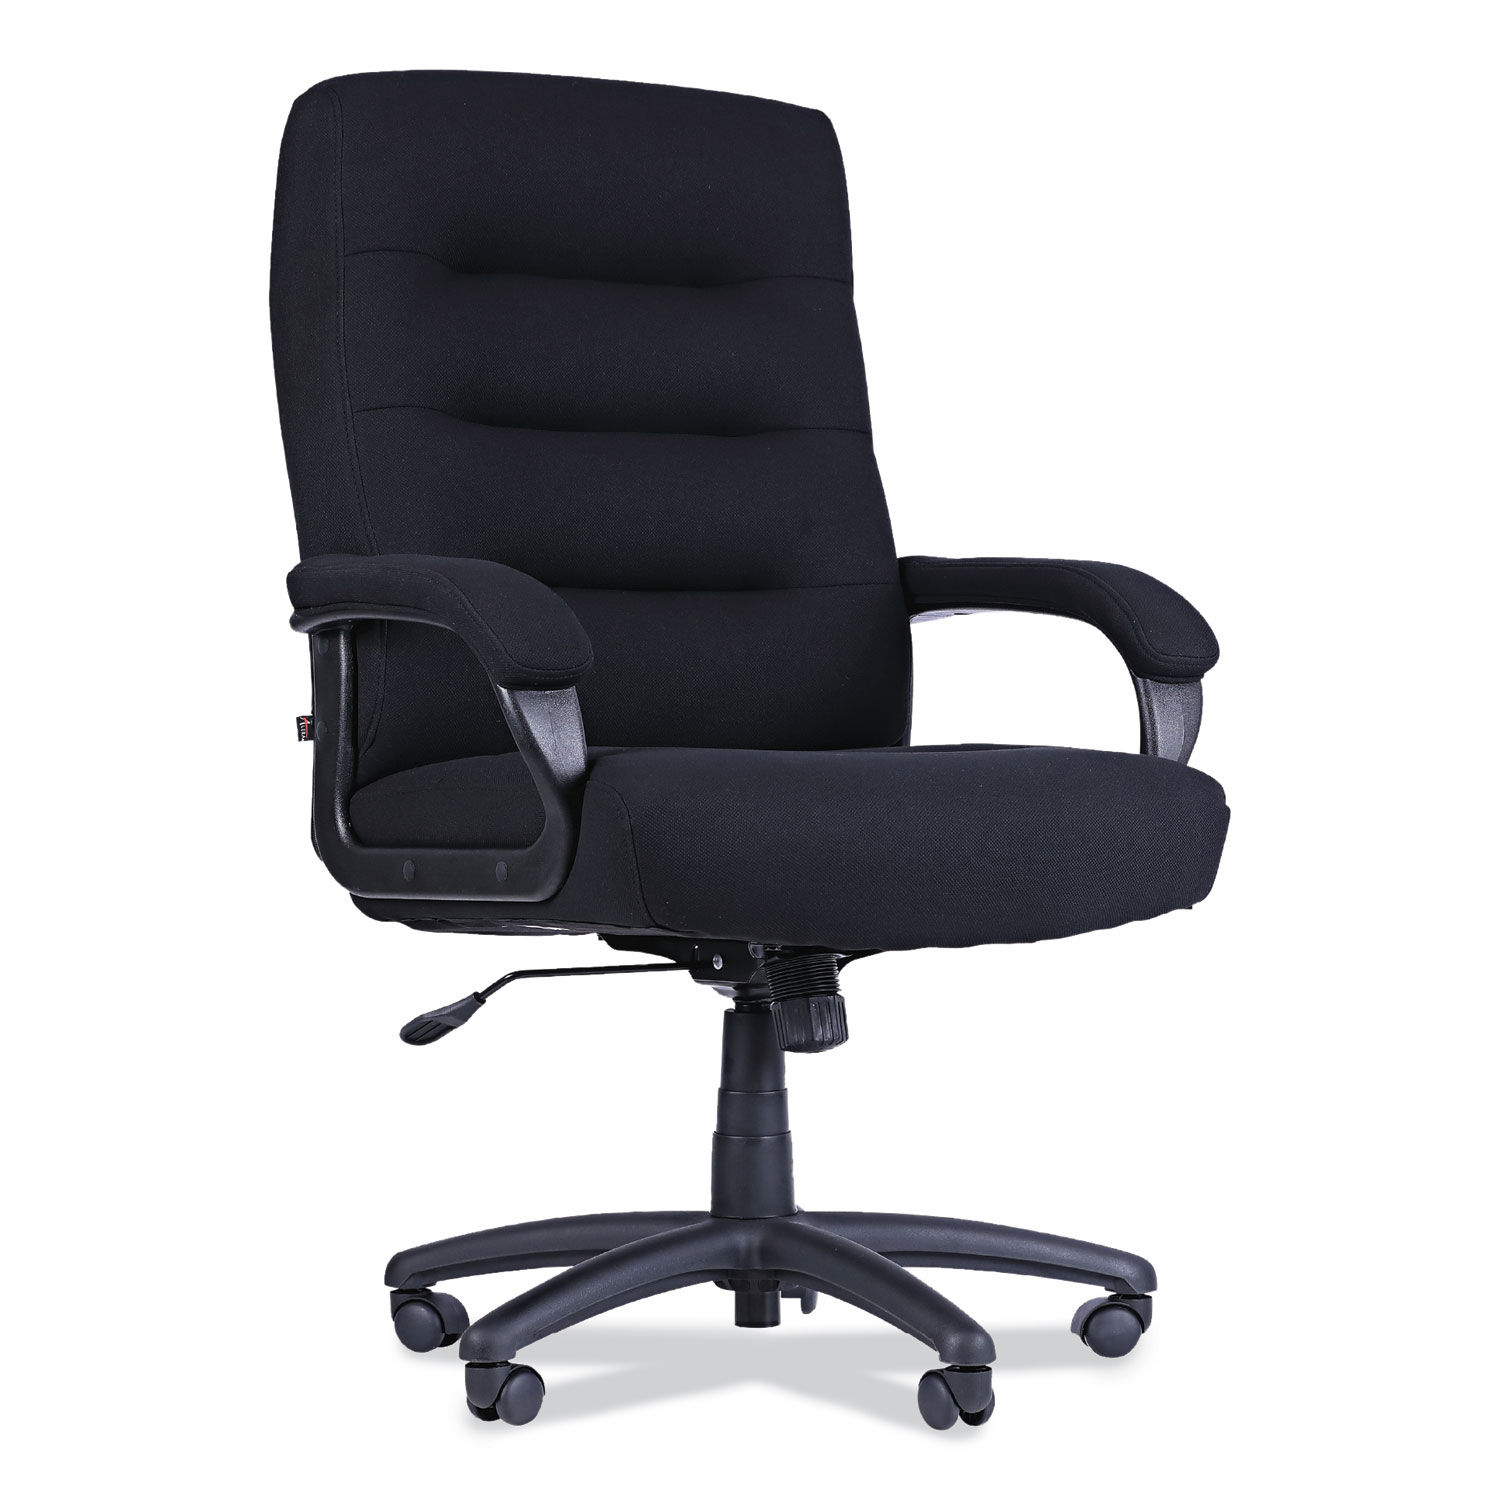 Alera Kesson Series High-Back Office Chair Supports Up to 300 lb, 19.21" to 22.7" Seat Height, Black